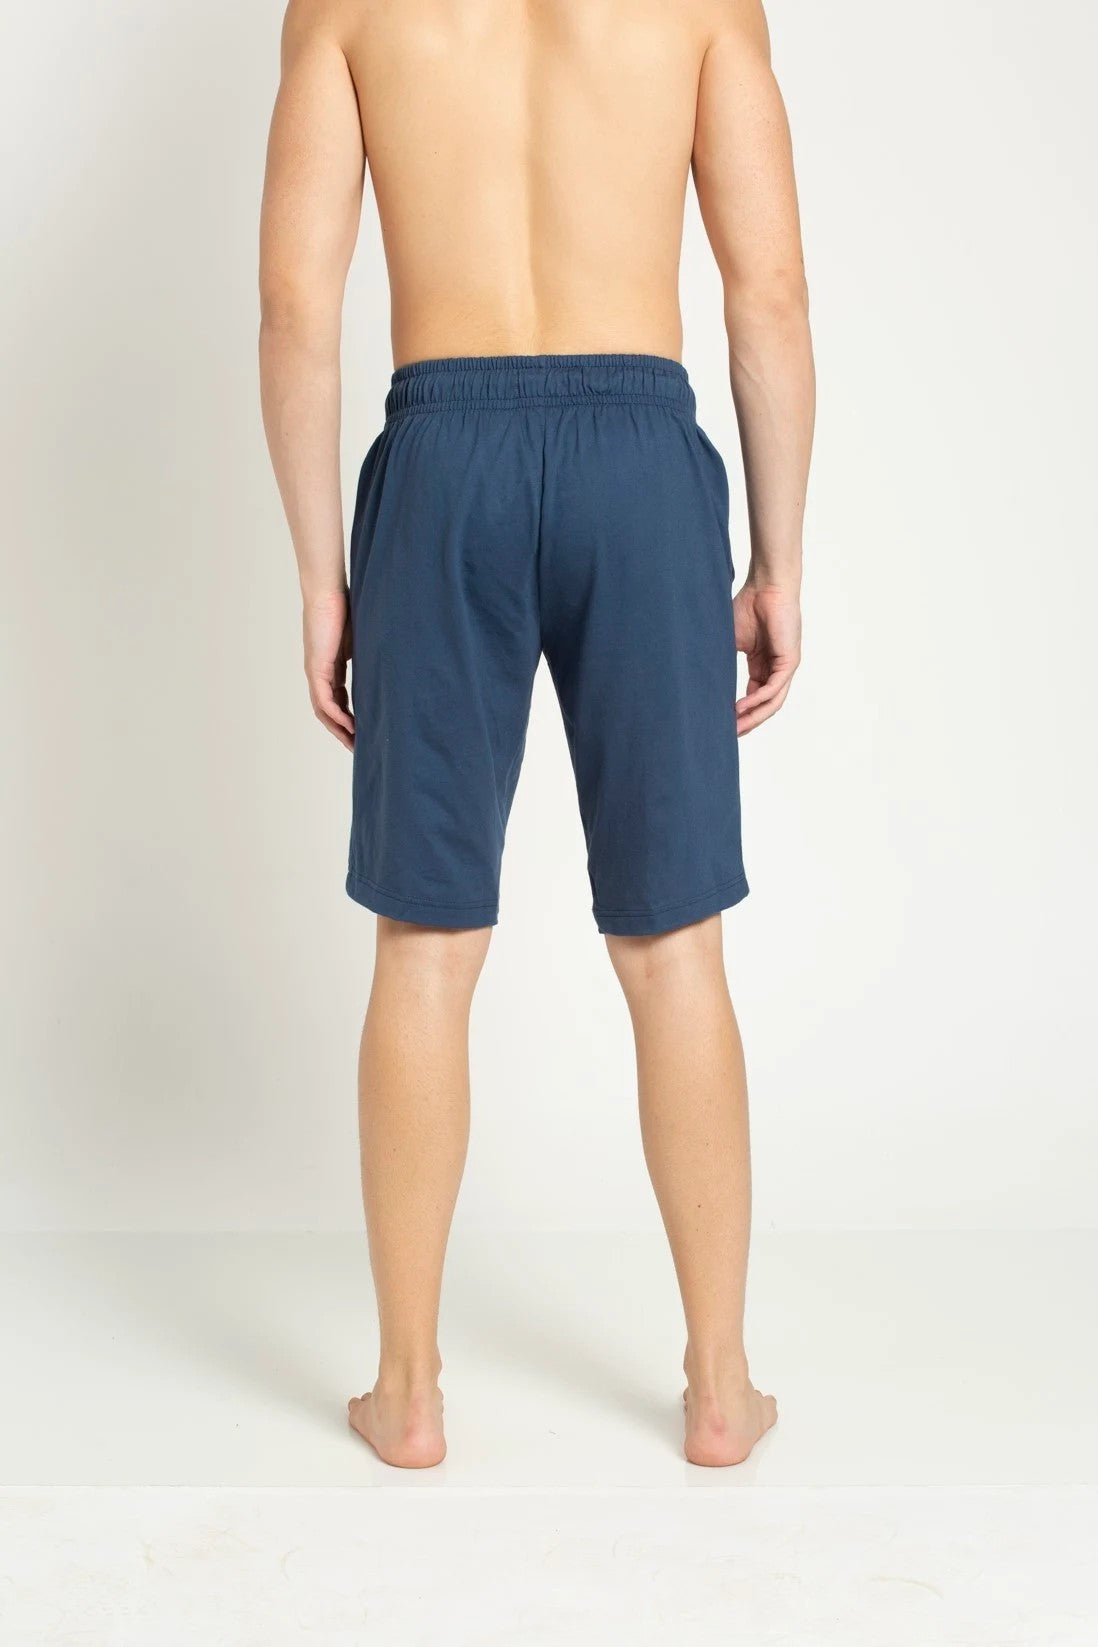 Men's Insignia Blue Straight fit shorts